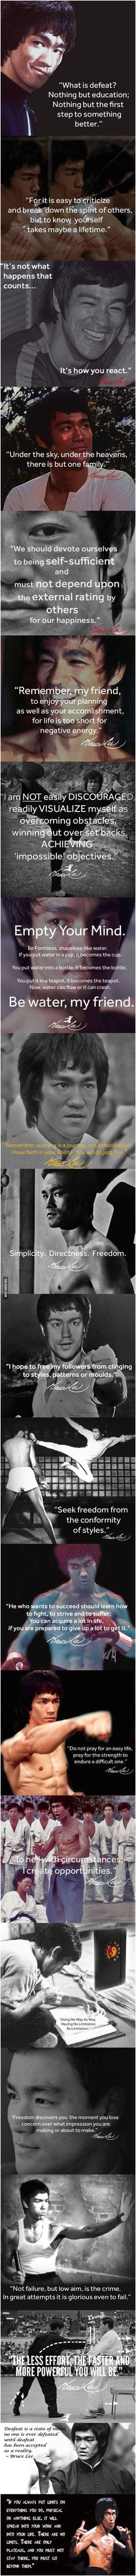 21 powerful and inspiring quotes from the legendary bruce lee